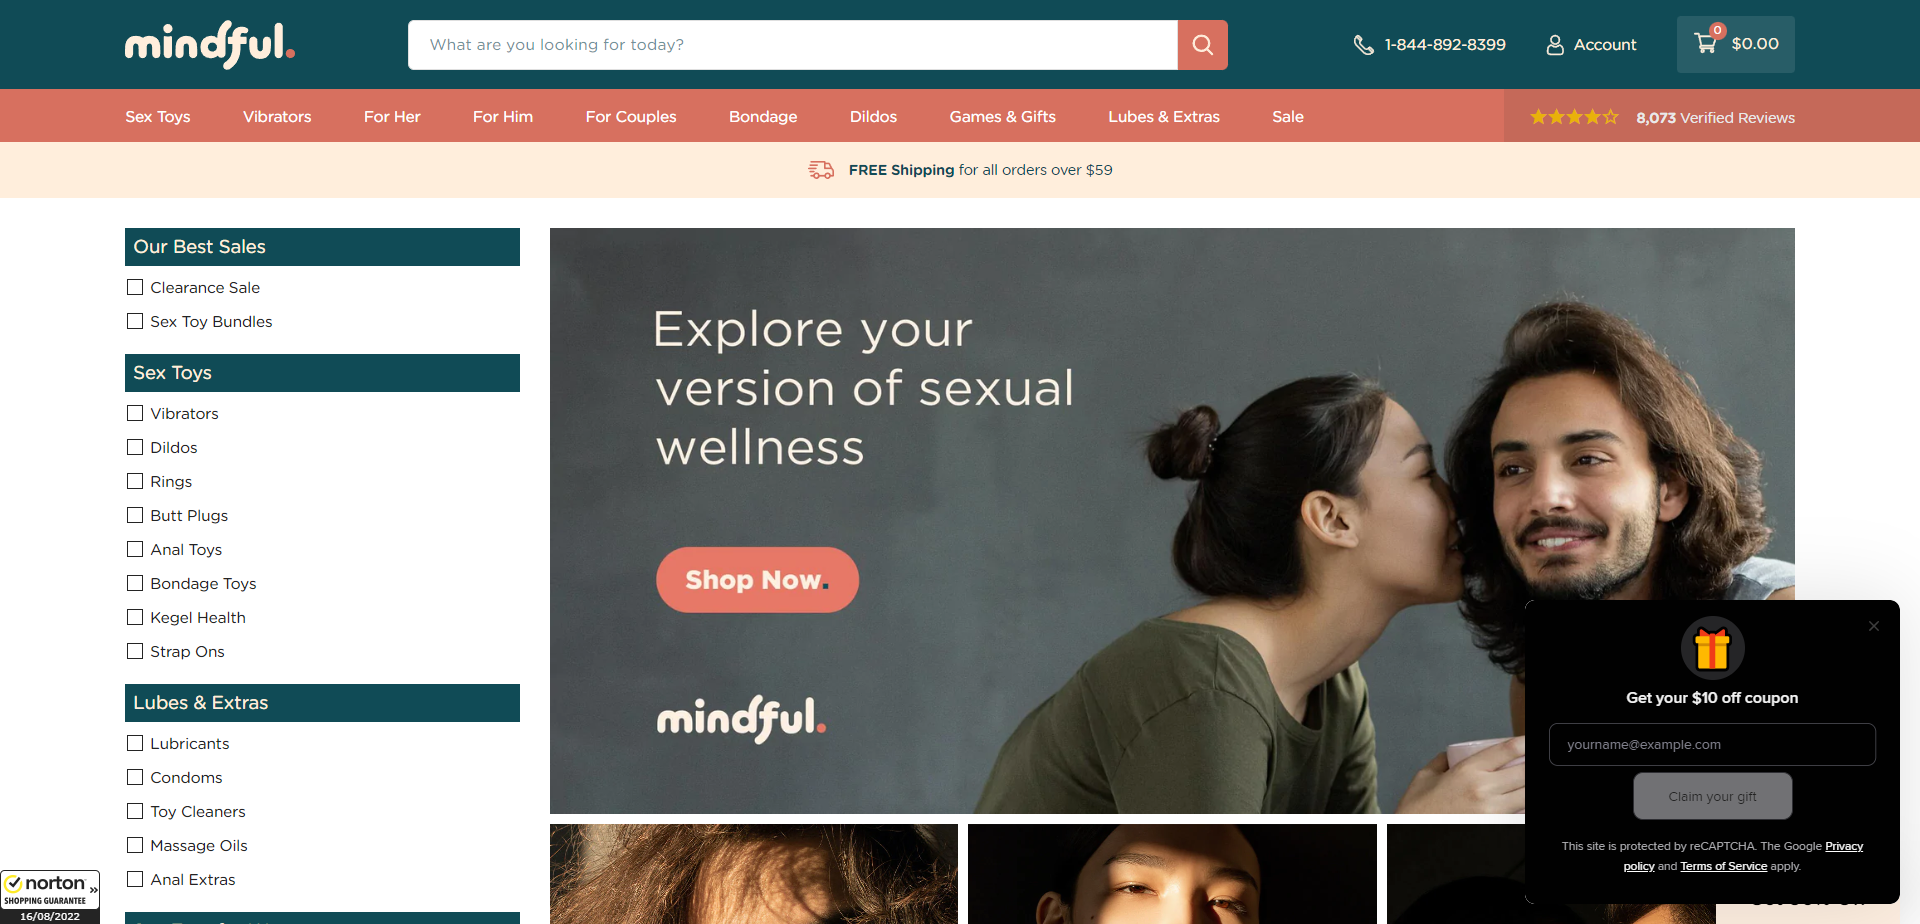 Landing Page for Just Mindful